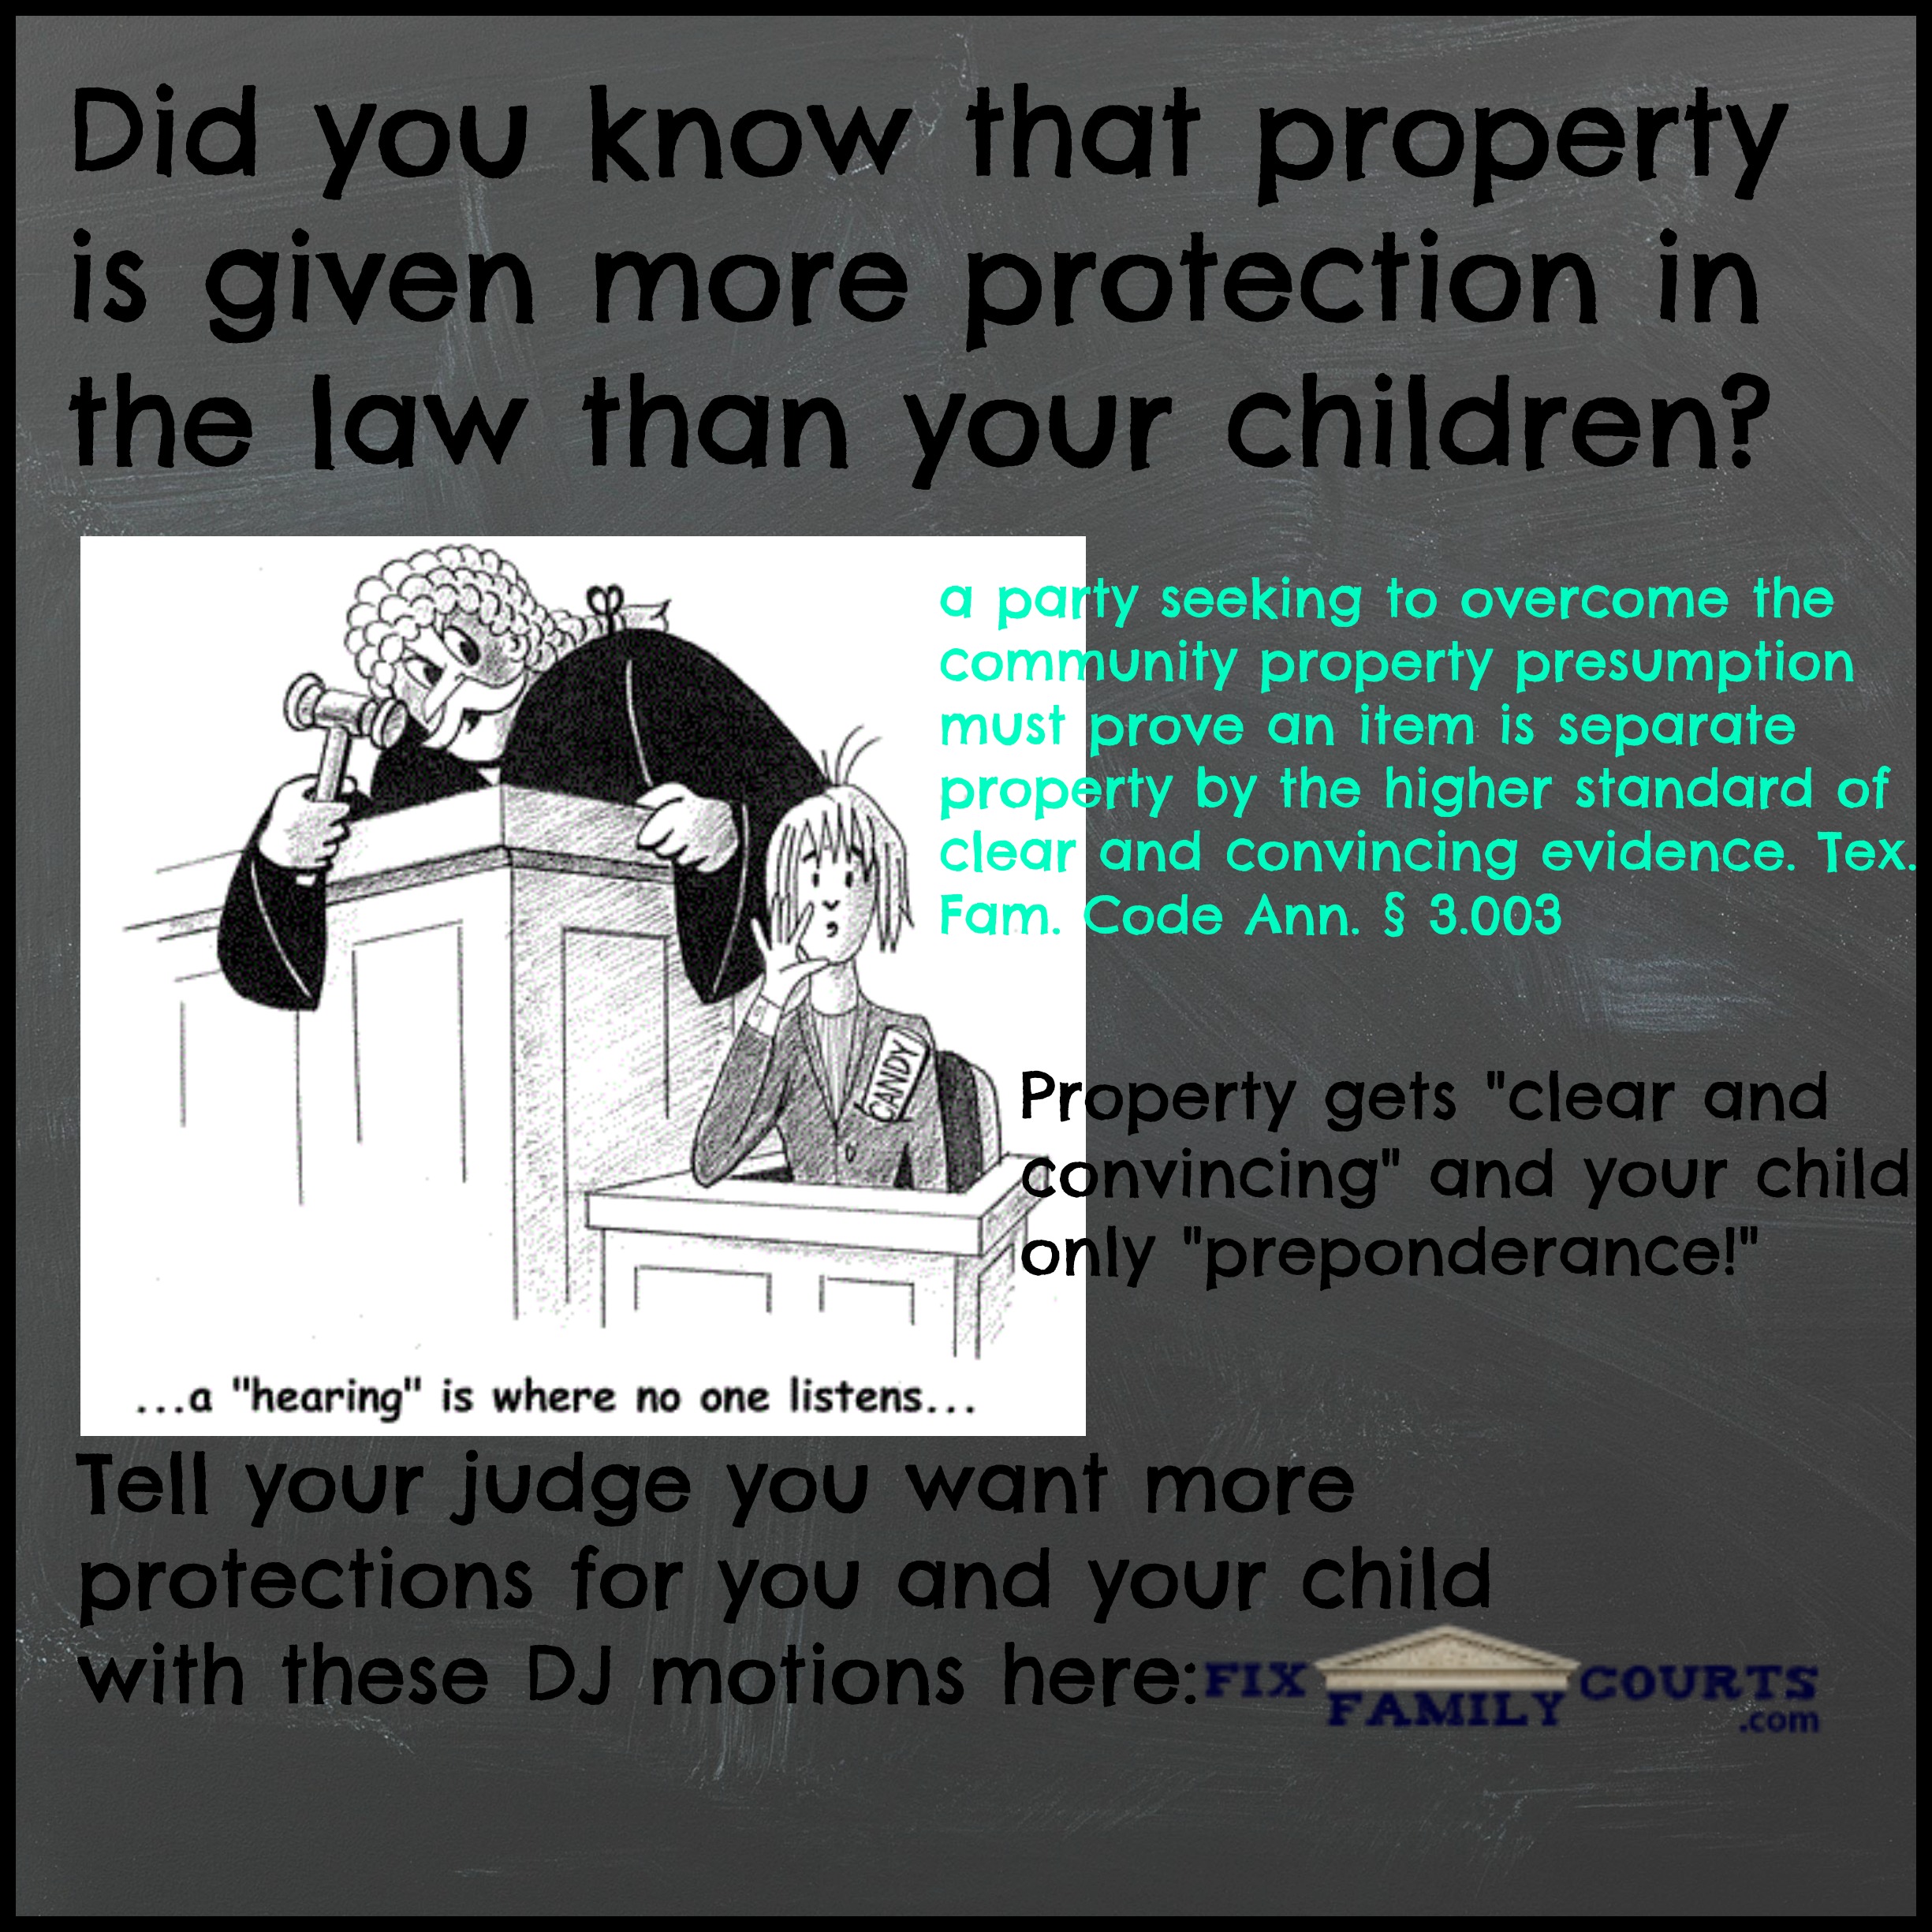 property more protection than children